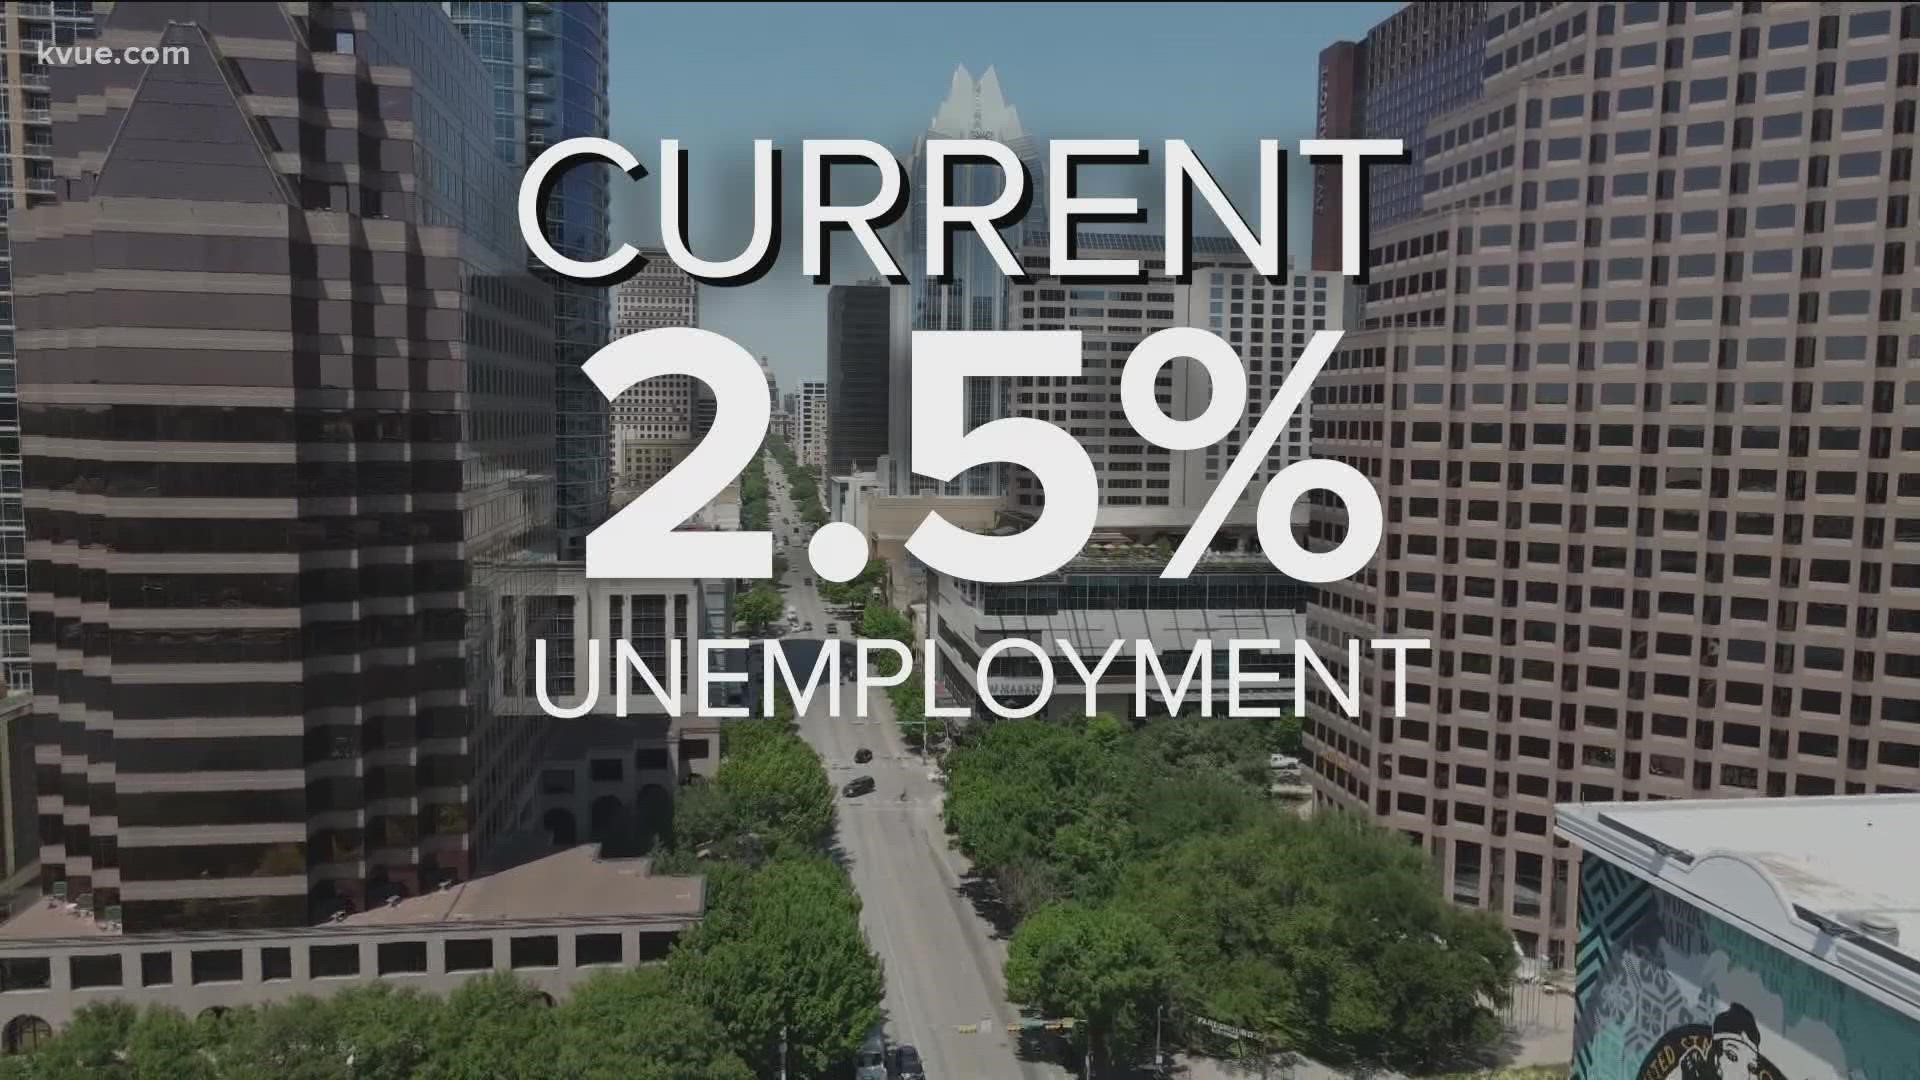 The unemployment rate in Austin is the lowest it has been since the pandemic started. Here's where the job market is seeing the most growth.